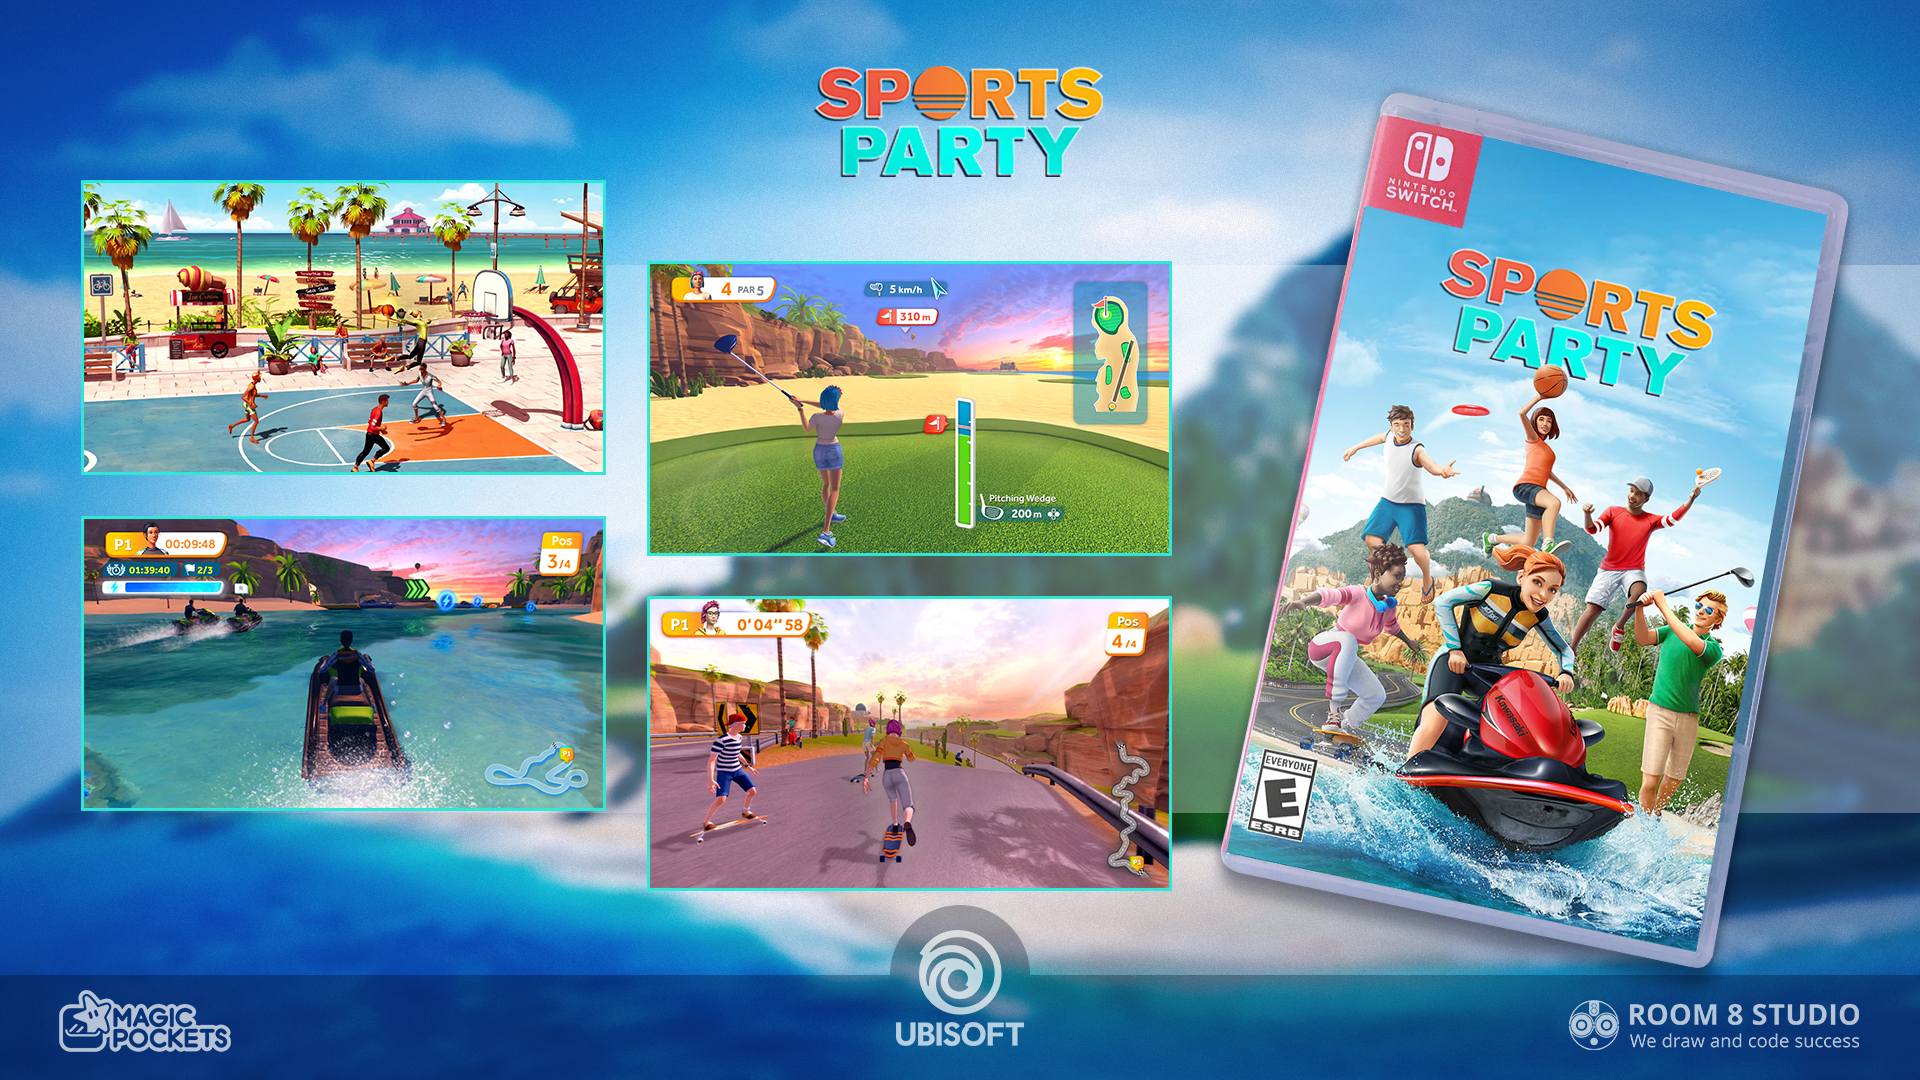 Get An Inside Look On Sports Party Co Development For Nintendo Switch With Ubisoft Room 8 Studio